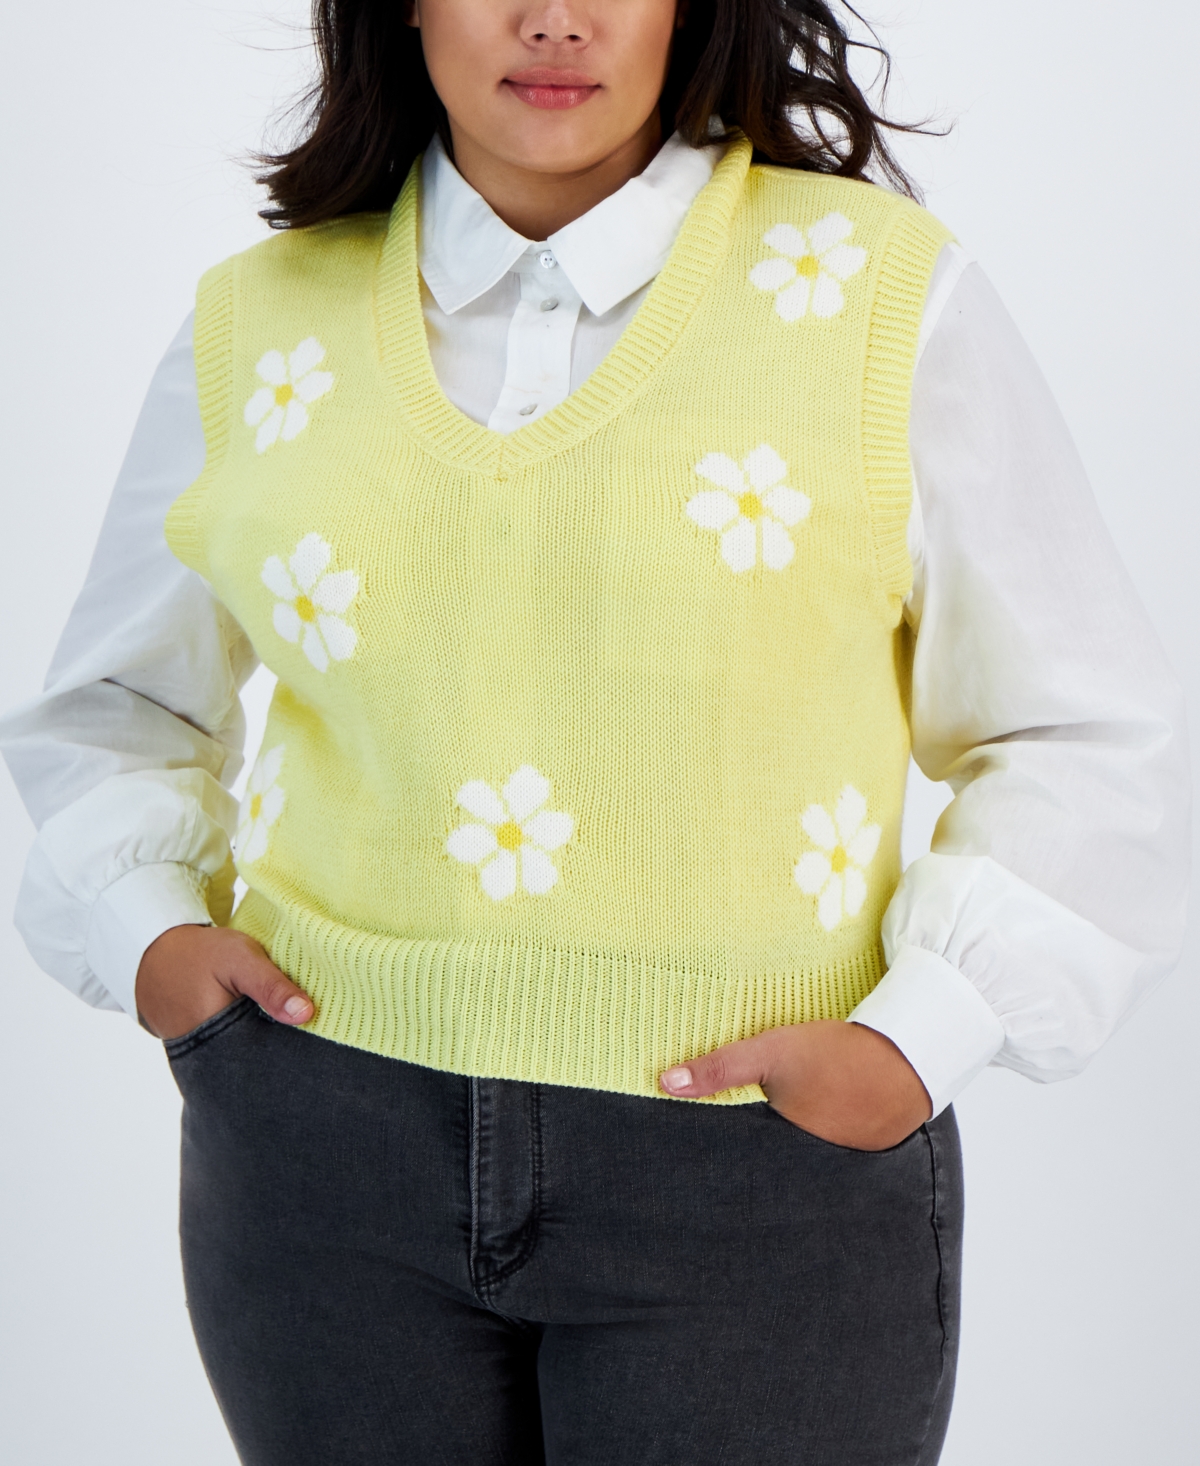 Just Polly Trendy Plus Size Daisy Sweater Vest